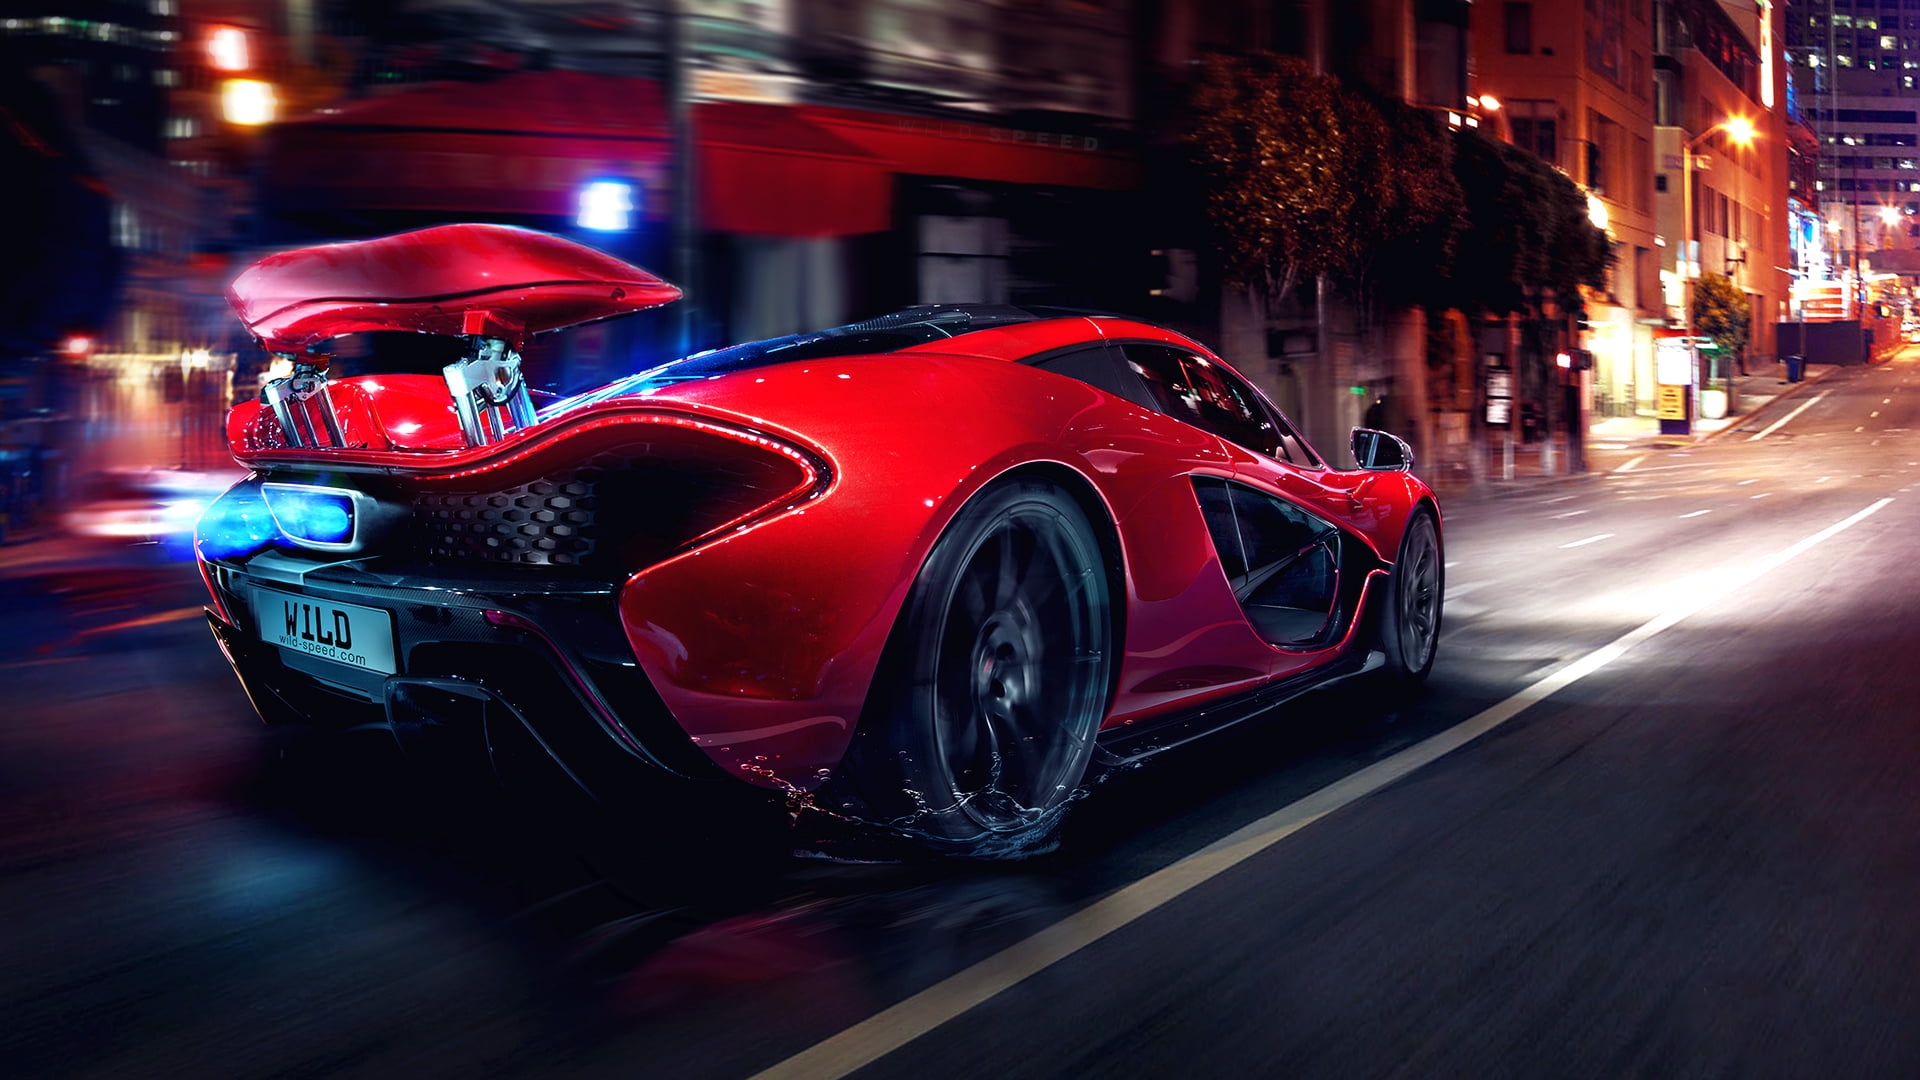 red sports car, Concept, Glow, Lights, Night, Street, Tuning